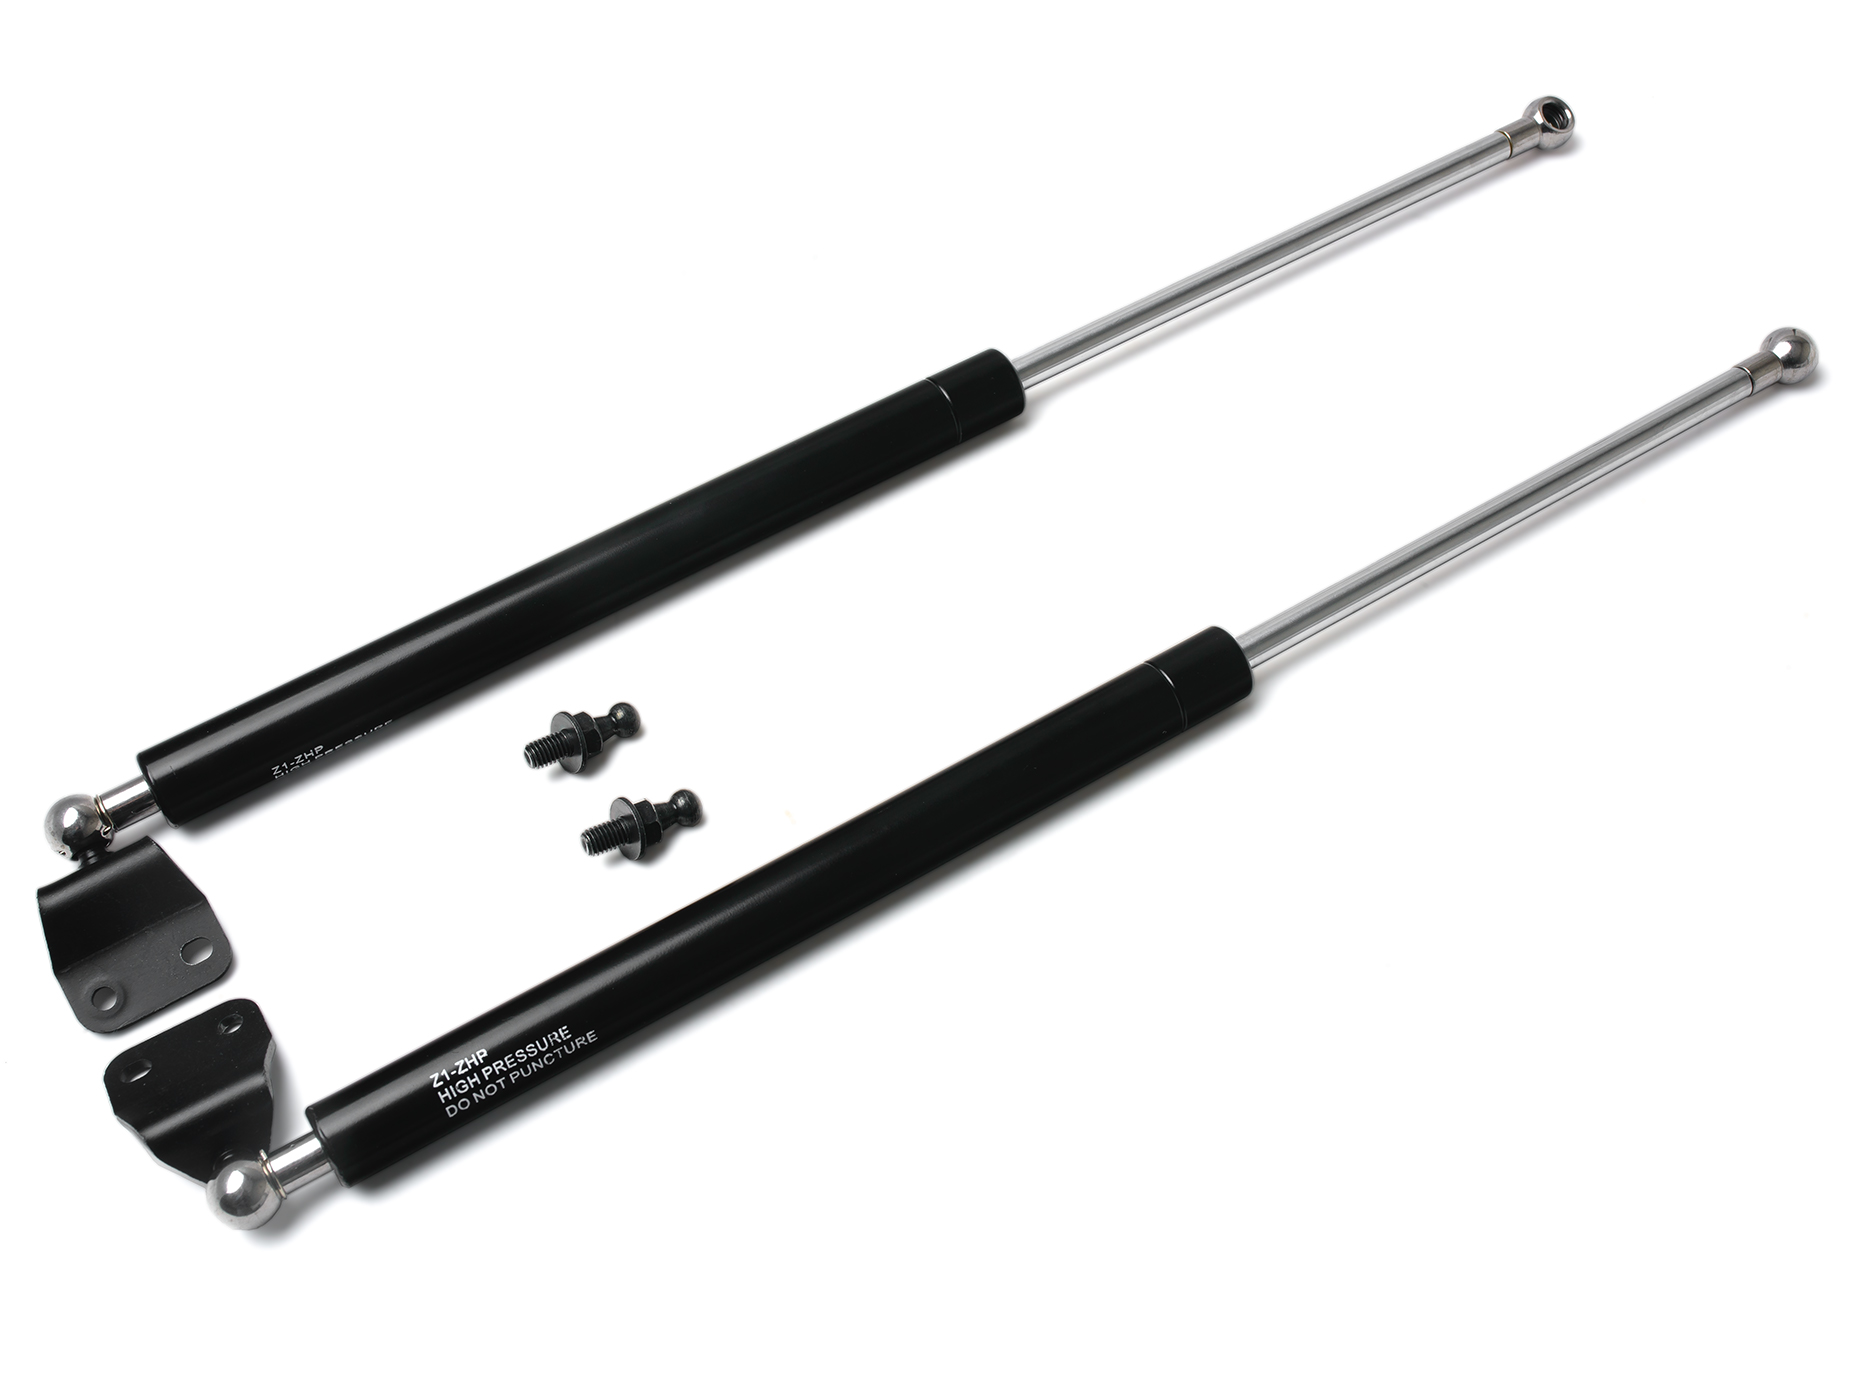 Vepagoo 4194 Rear Trunk Liftgate Lift Support Strut Compatible with 2003-2008 Nissan 350z Tailgate Rear Hatch Gas Shocks with Added Pressure for Larger Spoiler Includes Brackets,Set of 2 